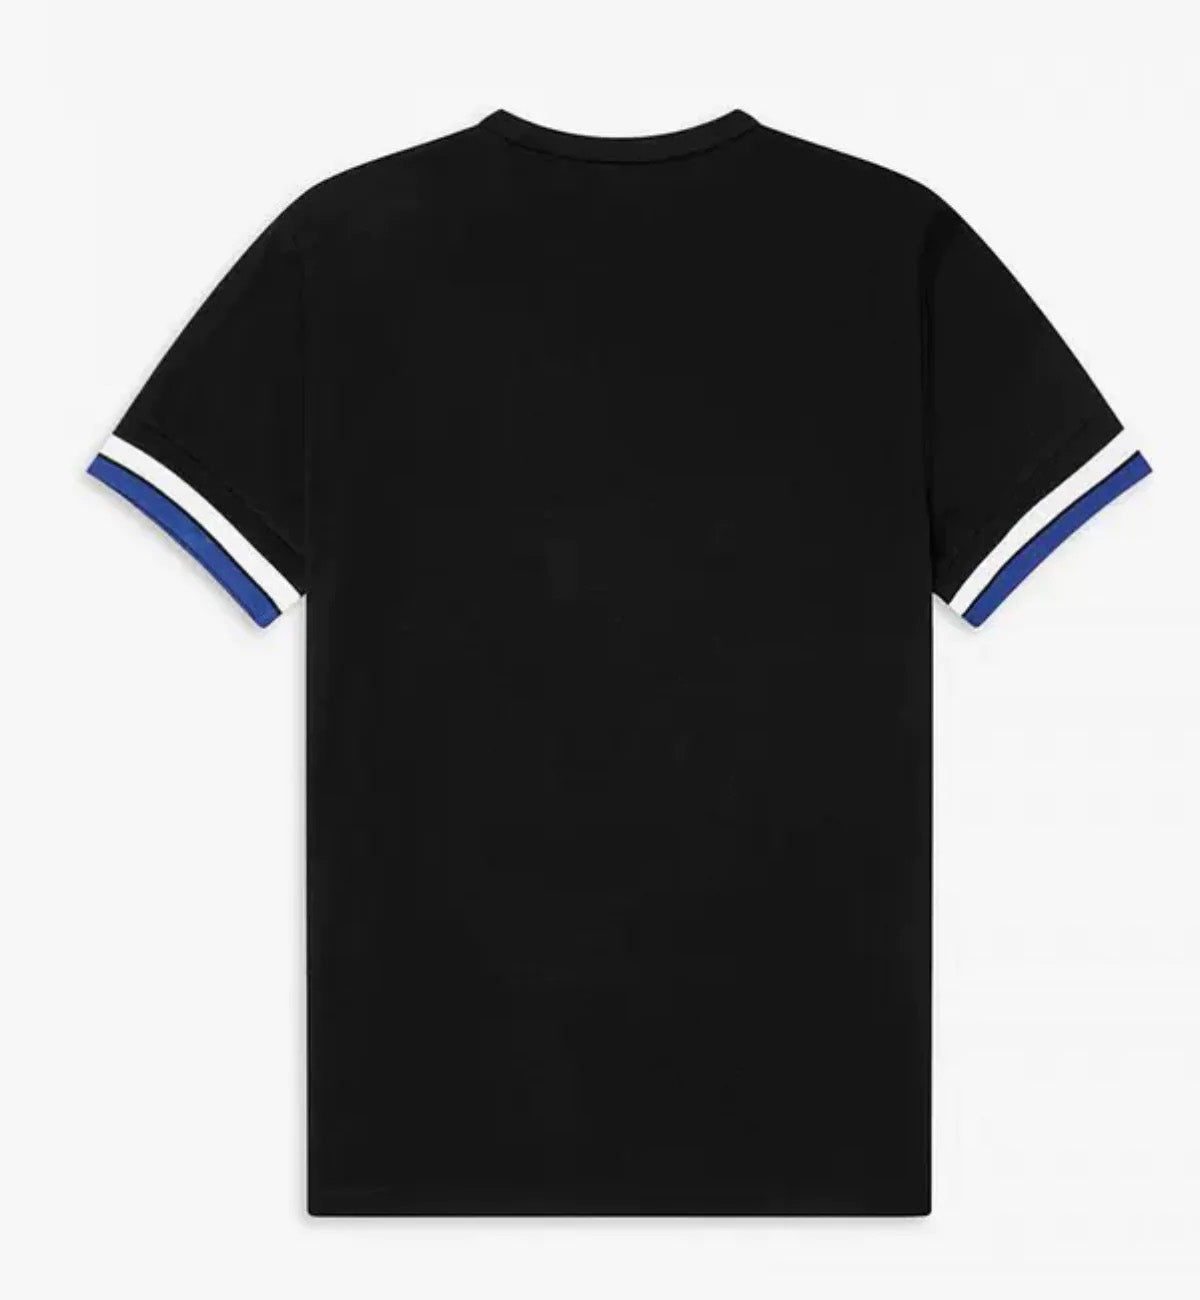 Fred Perry Black Shirt with White Blue Stripe T-Shirt